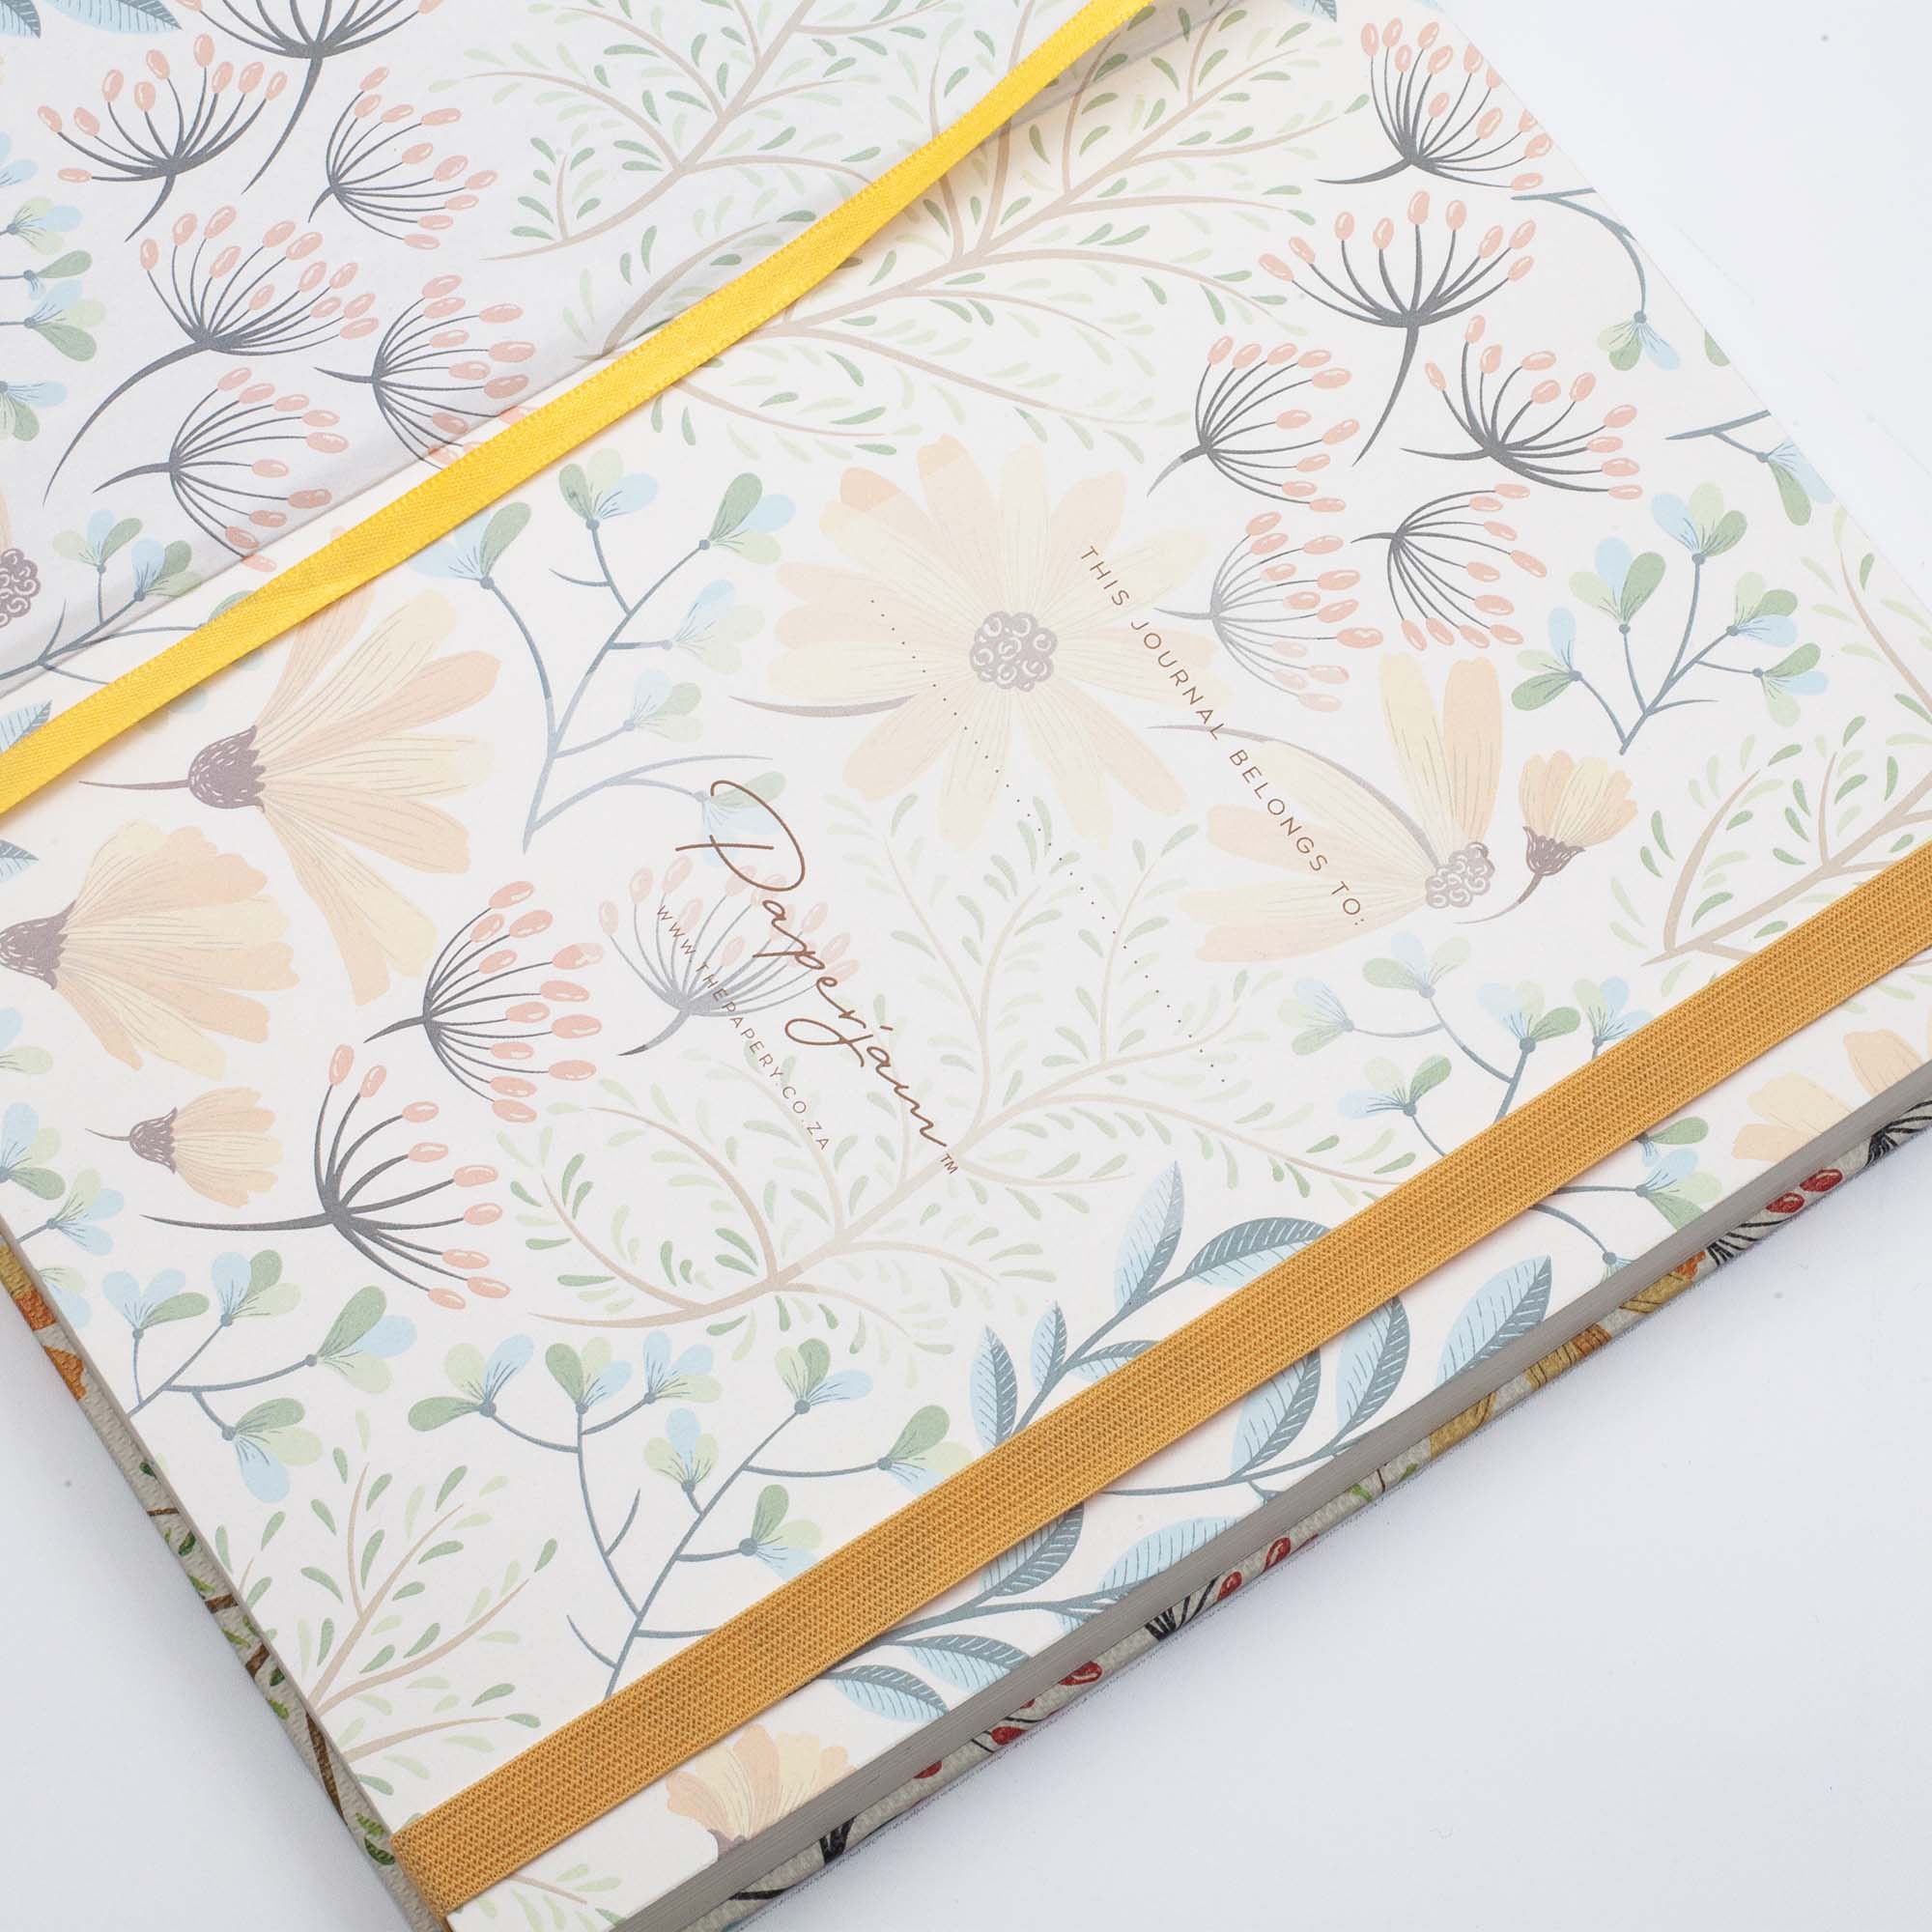 Image shows the endpaper of the Summer Premium dotted journal